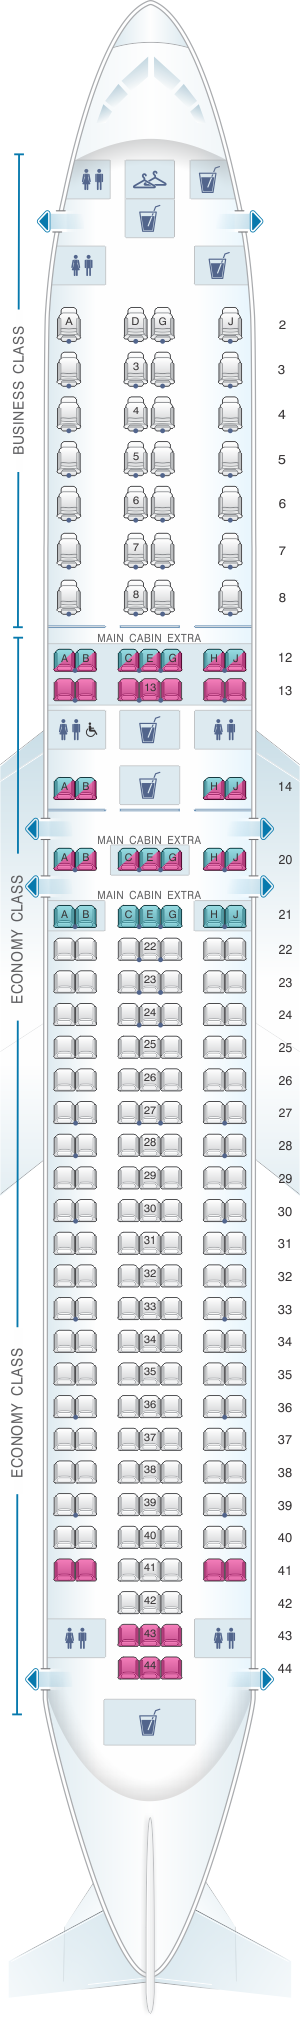 Seat map for American Airlines Boeing B767 300